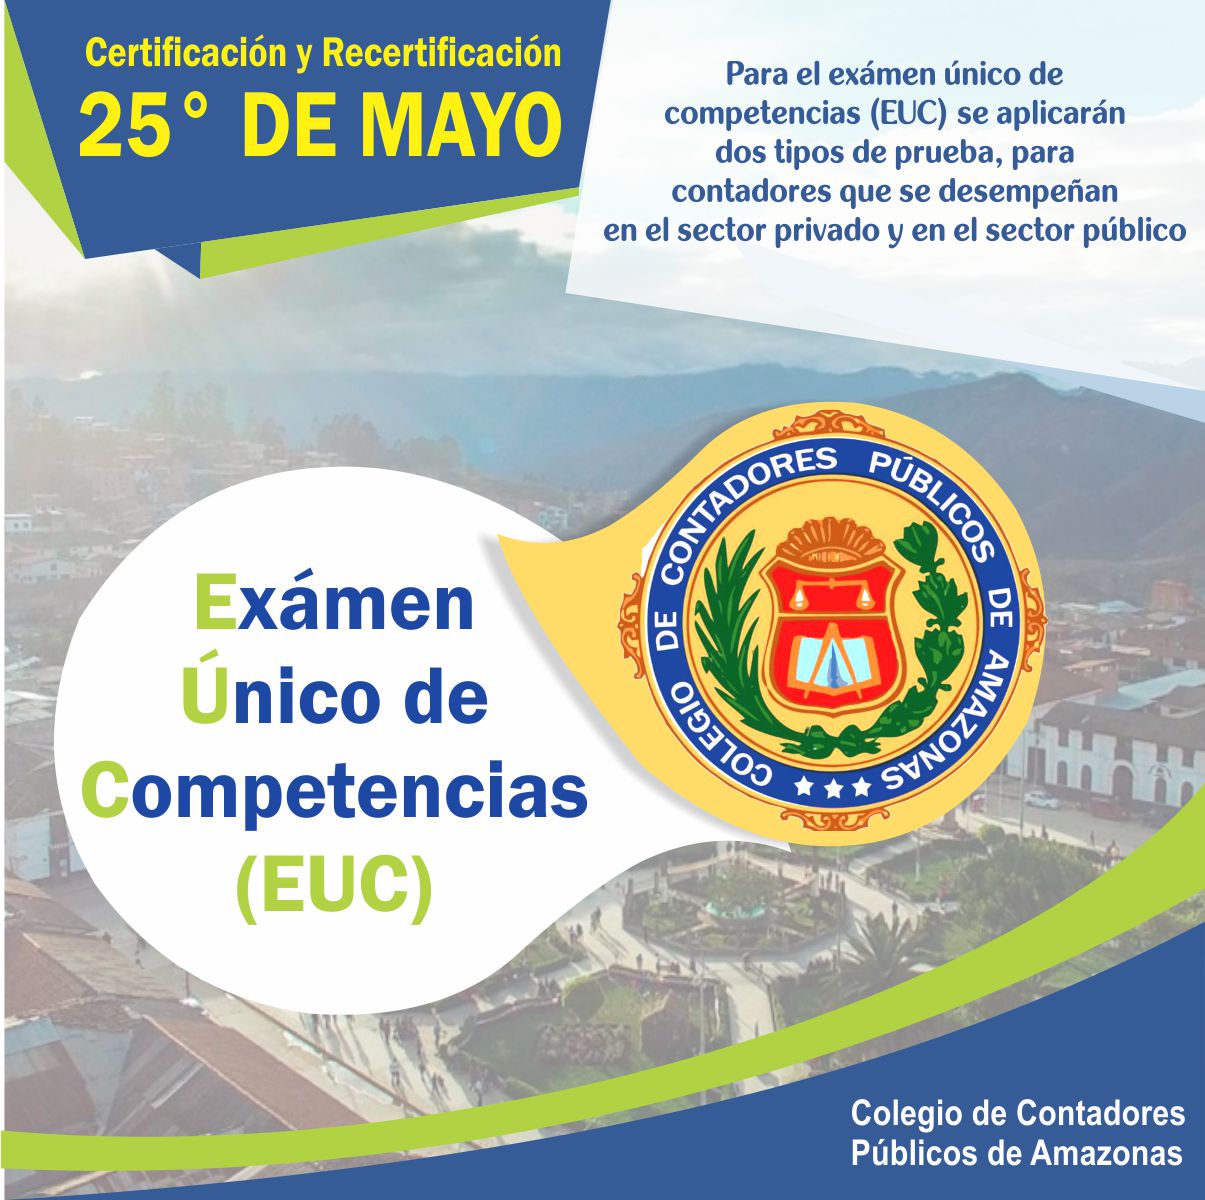 Thumbnail for the post titled: CERTIFICACION Y RECERTIFICACION – MAYO 2019